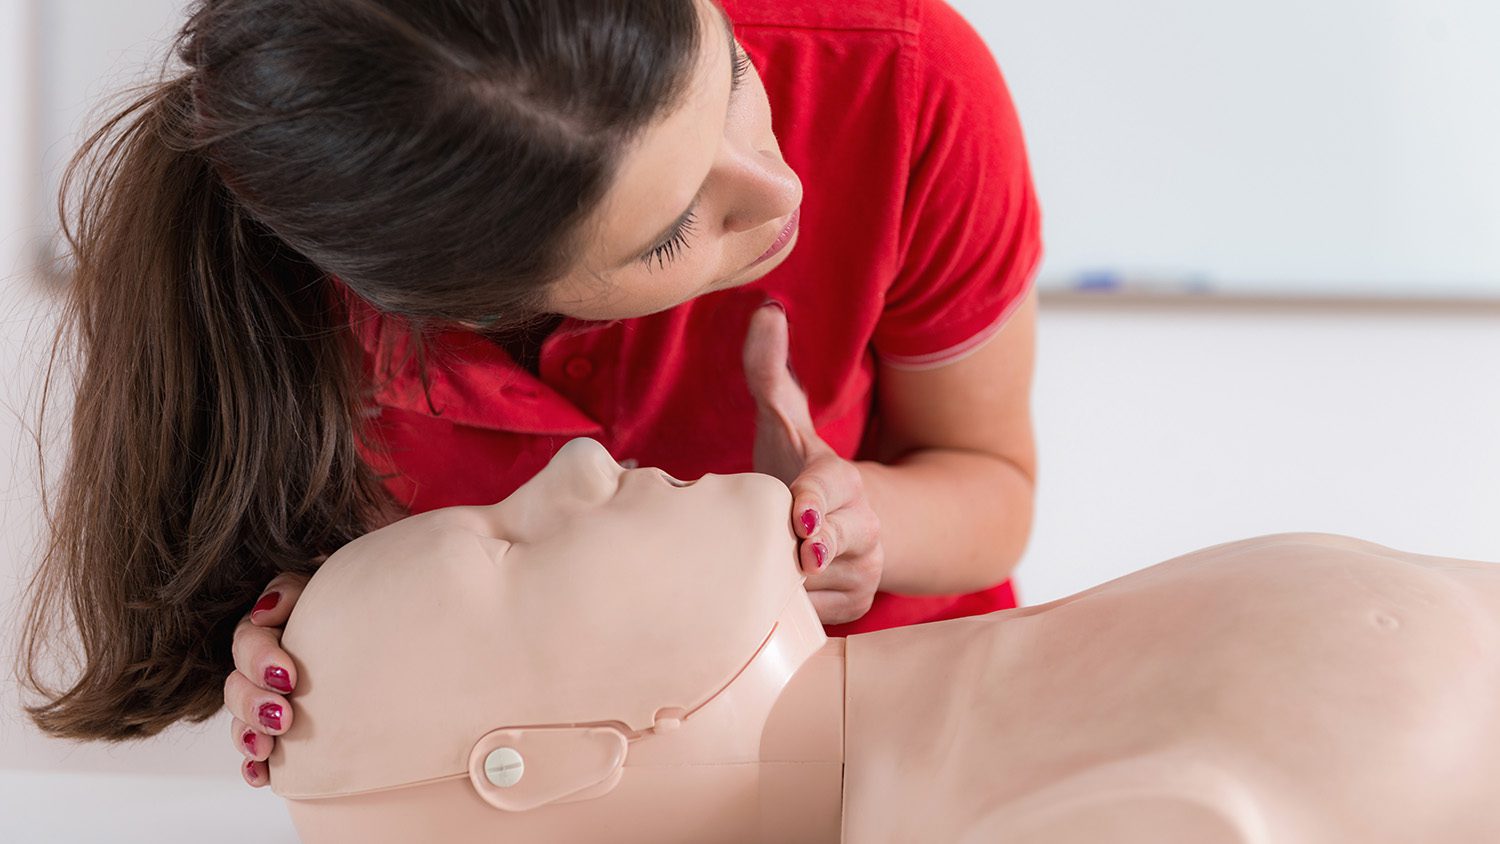 Heartsaver® First Aid CPR AED